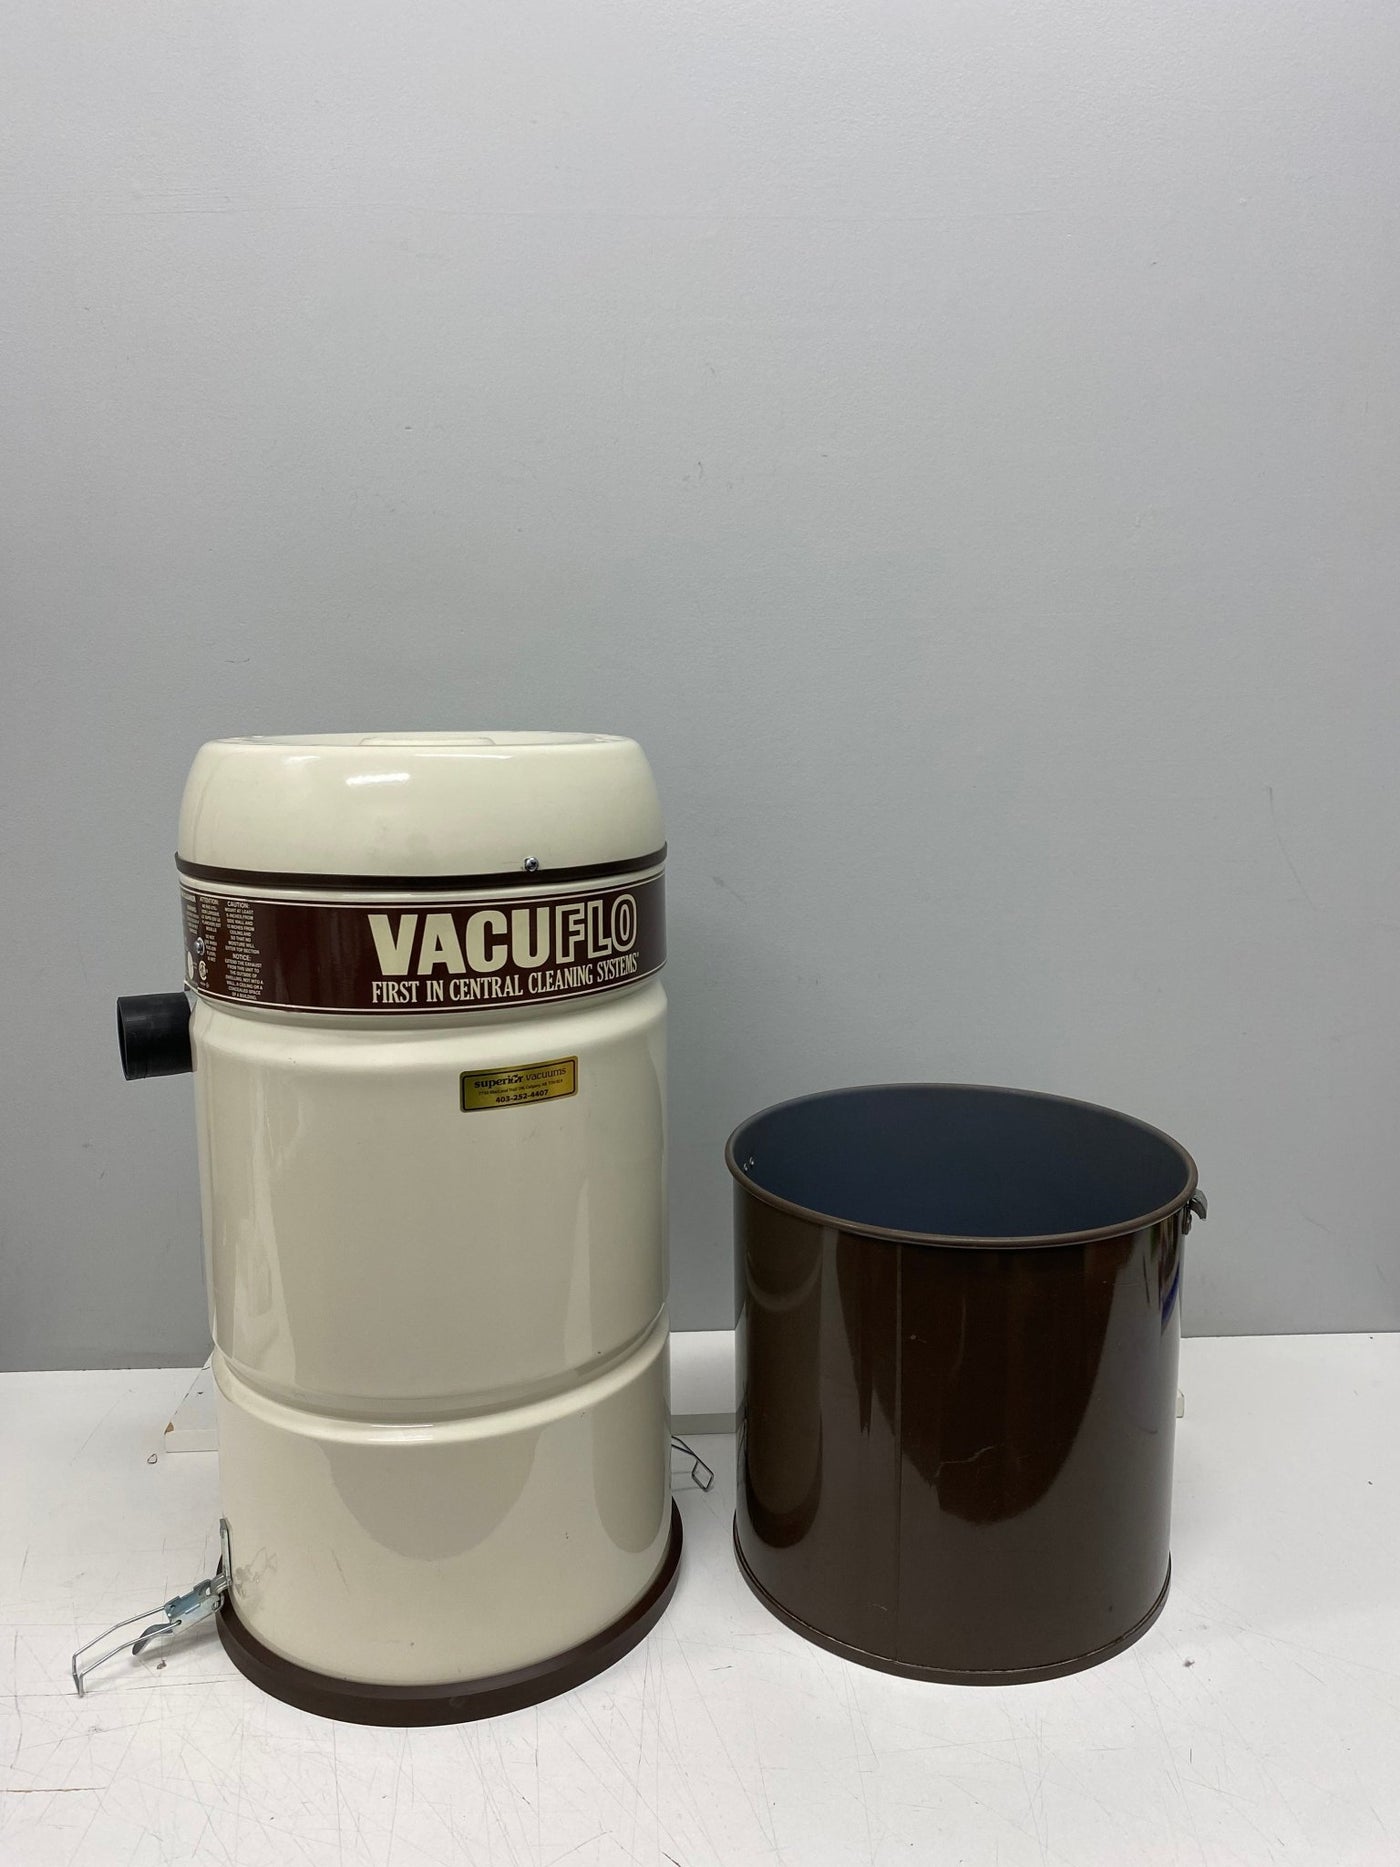 Refurbished Vacuflo 260 Central Vacuum Kit with 6-Month Warranty - Powerful Home Cleaning Solution